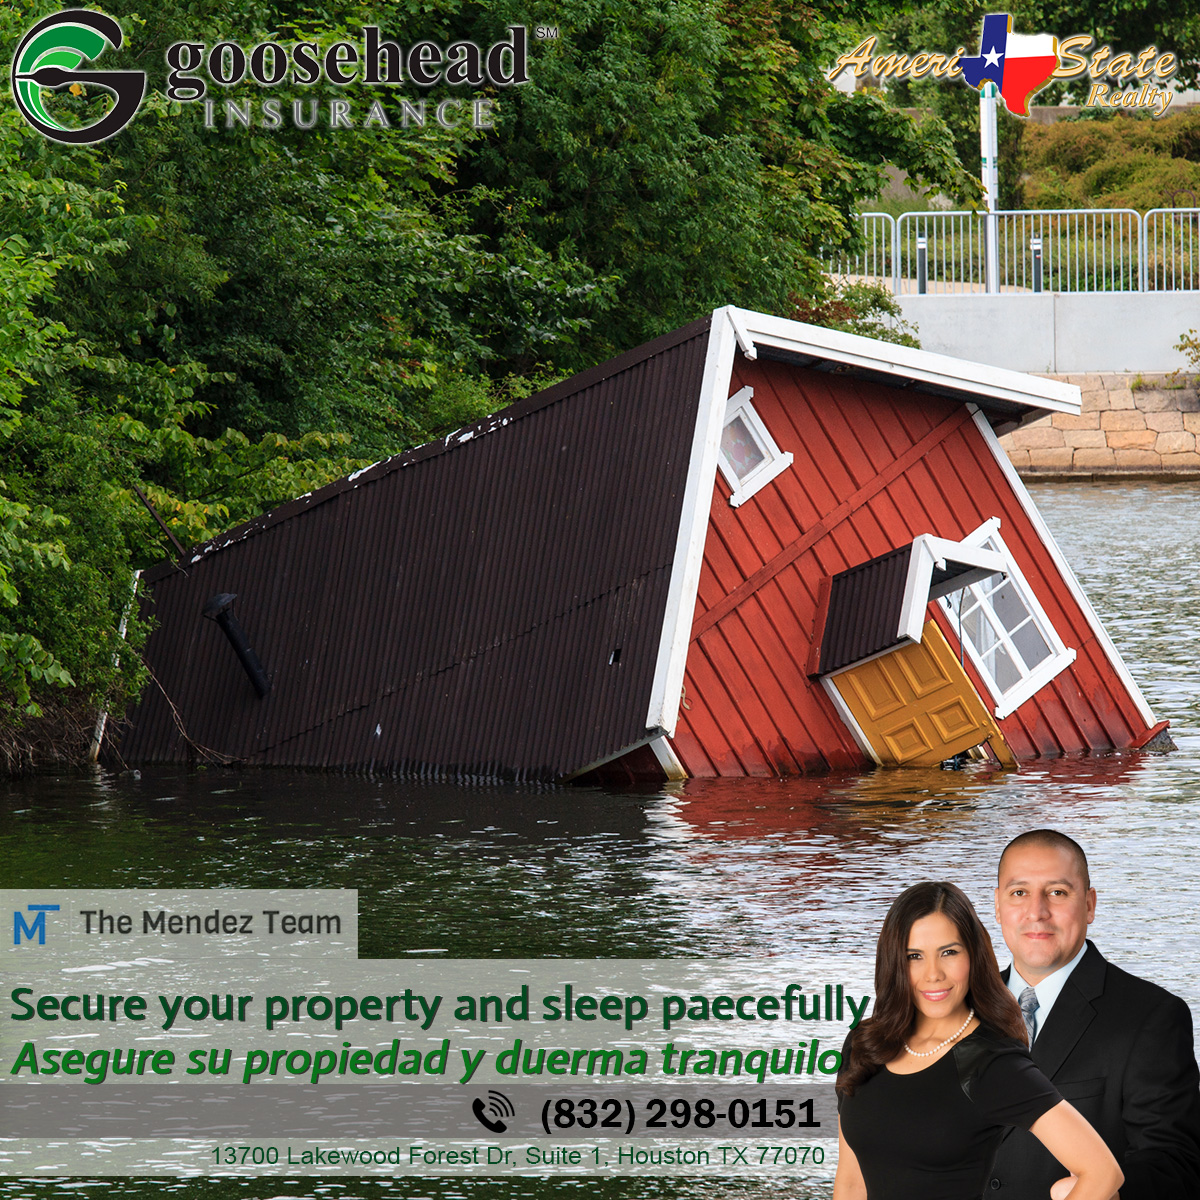 Now, we offer auto, home and flood insurance / Ahora